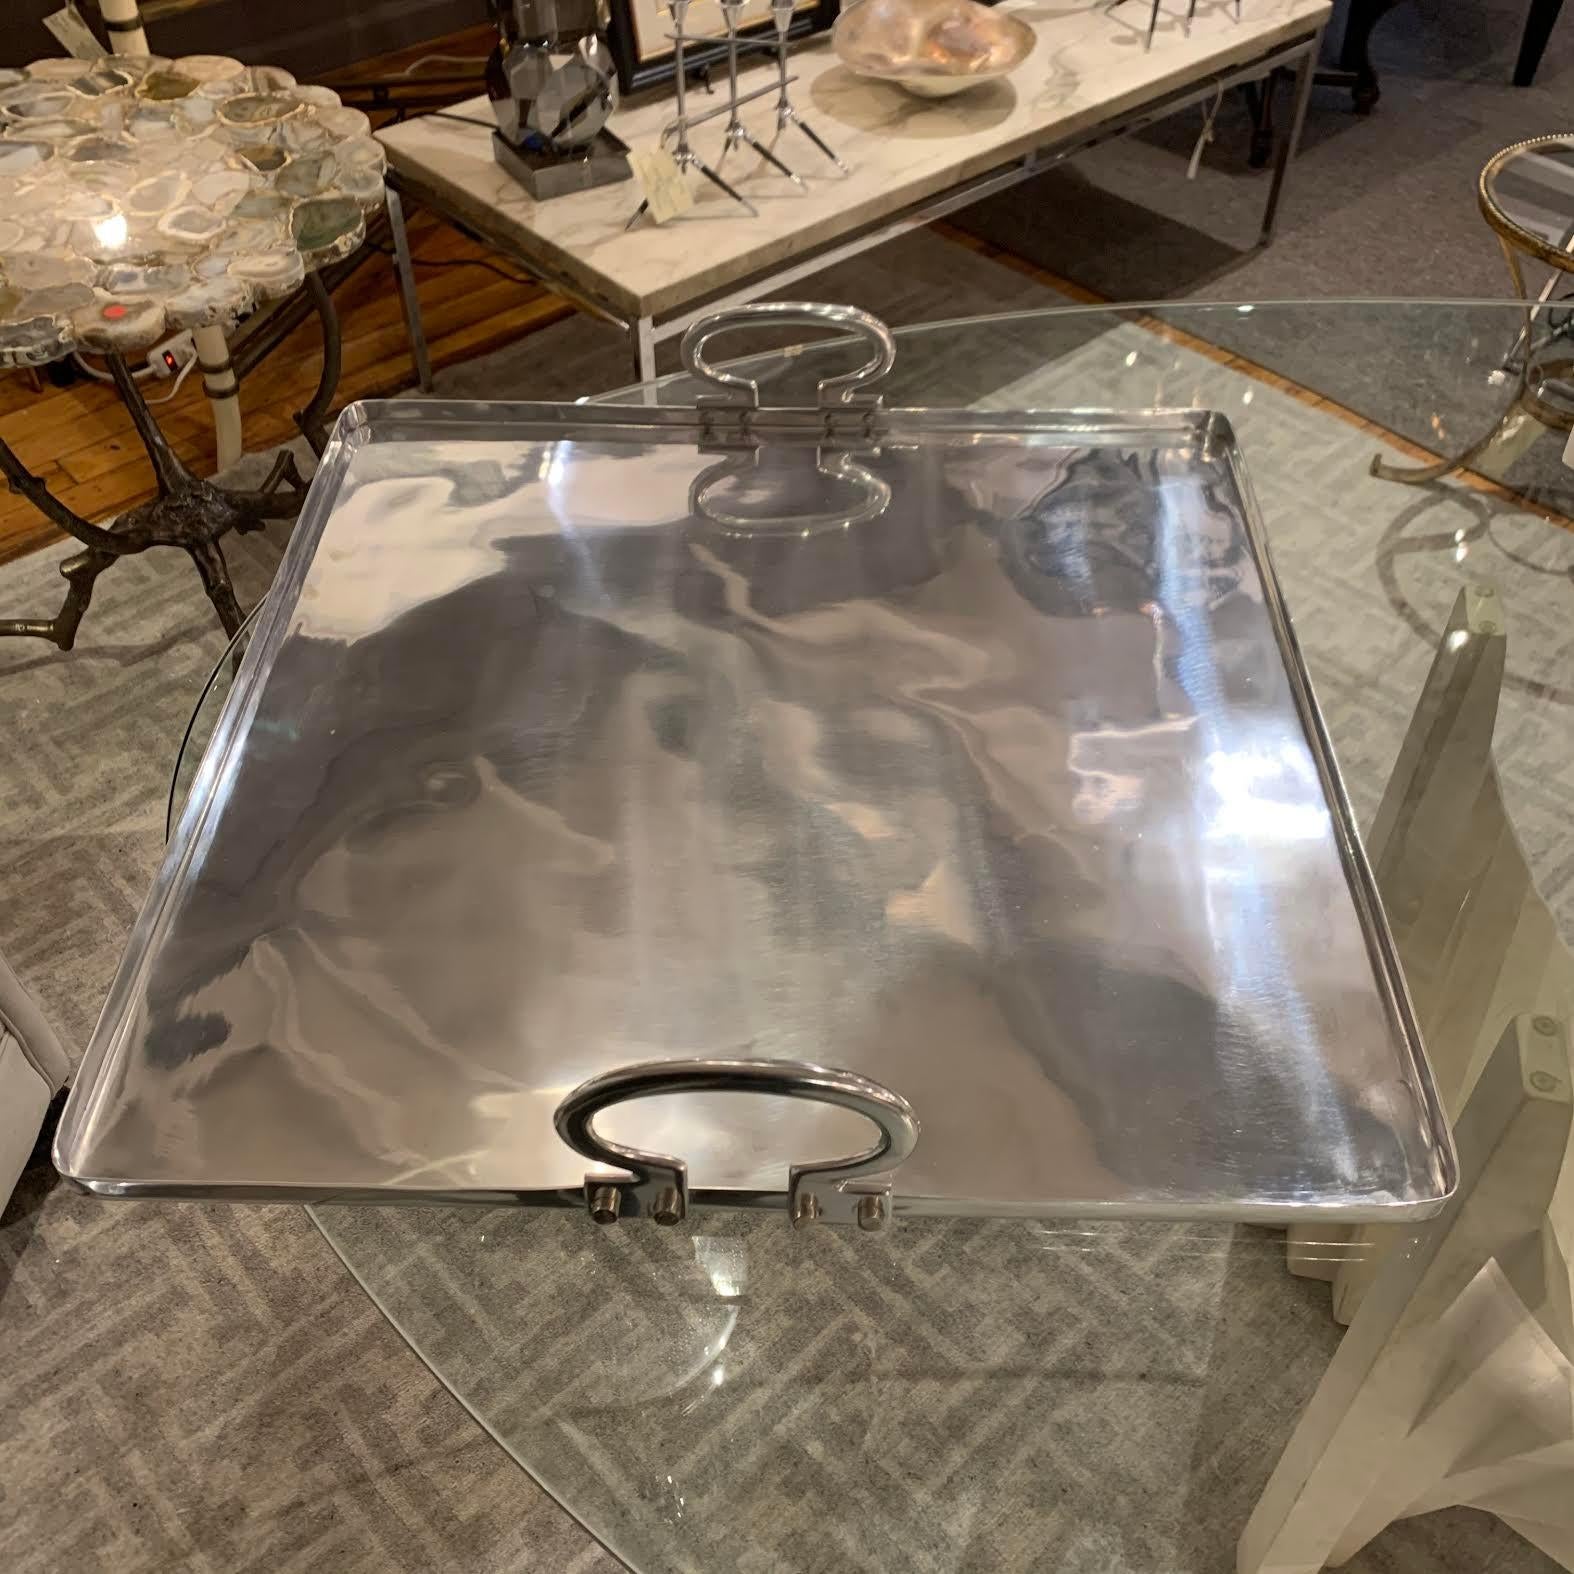 Contemporary Italian large square aluminum tray with handles.
Sits well with S4190X.
Can sit as tray within tray or separately. See image #4
S4190Z 24